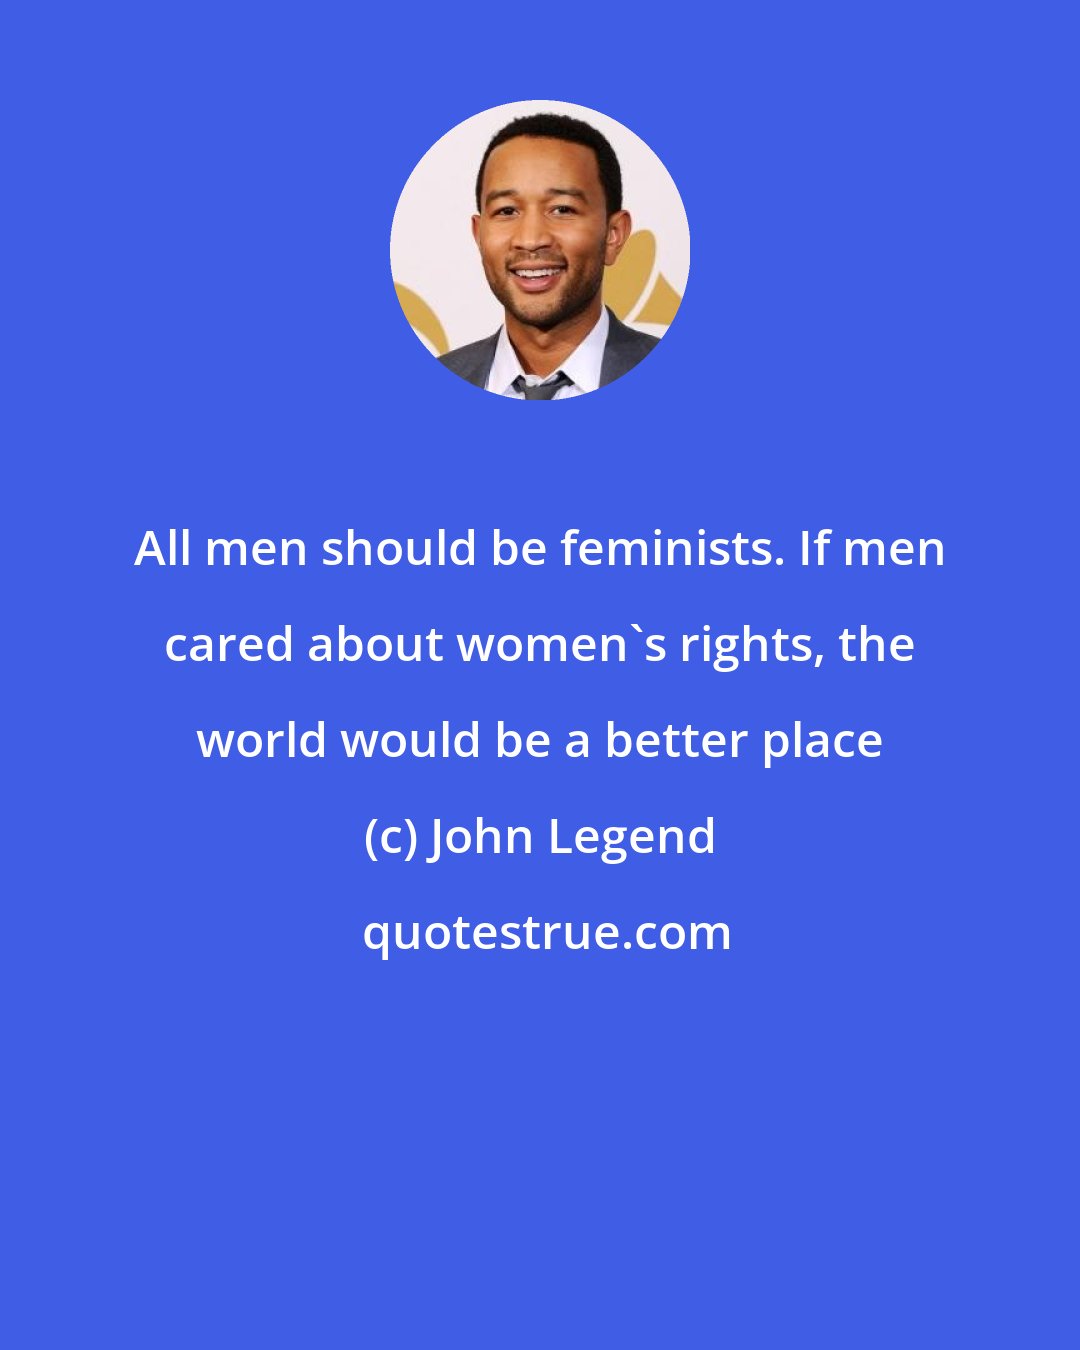 John Legend: All men should be feminists. If men cared about women's rights, the world would be a better place